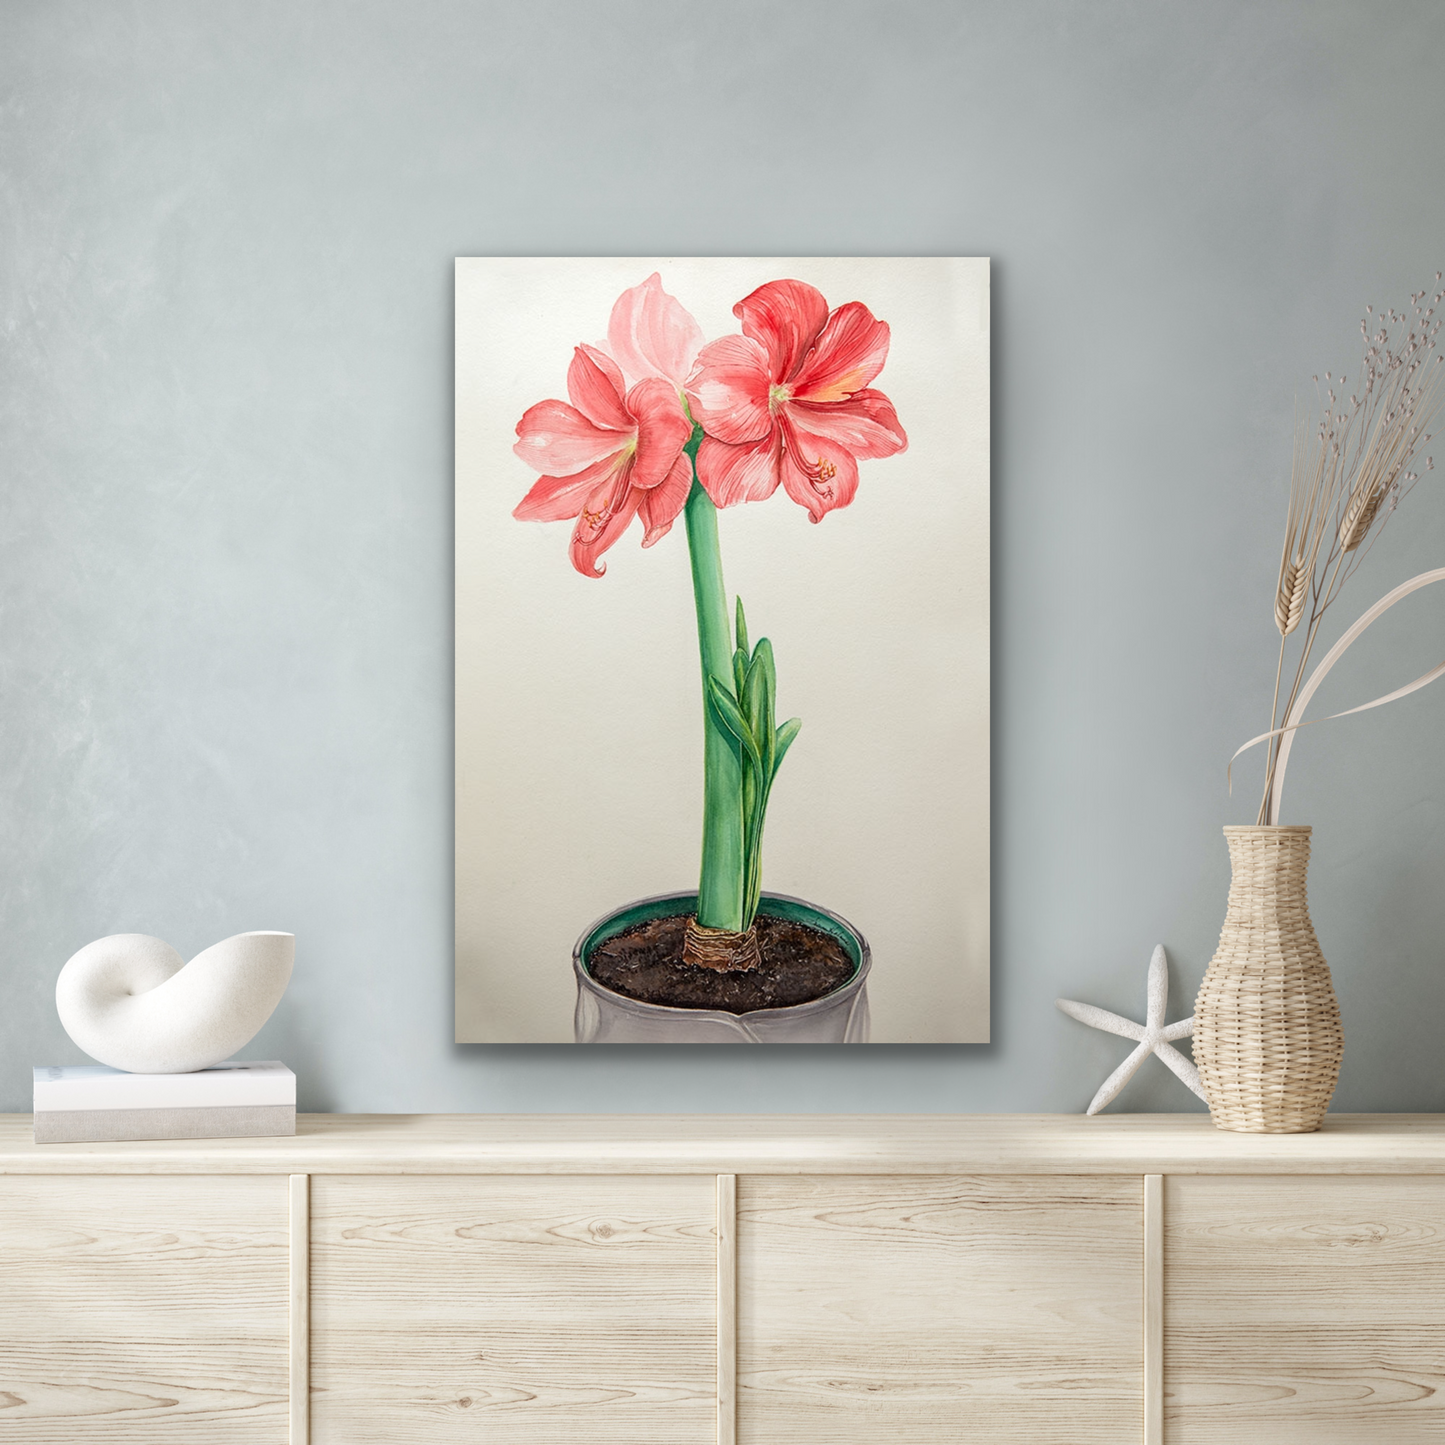 "Amaryllis Bloom" is an art piece that would look great in many rooms of your home. Consider for the kitchen, bathroom or a hallway area.